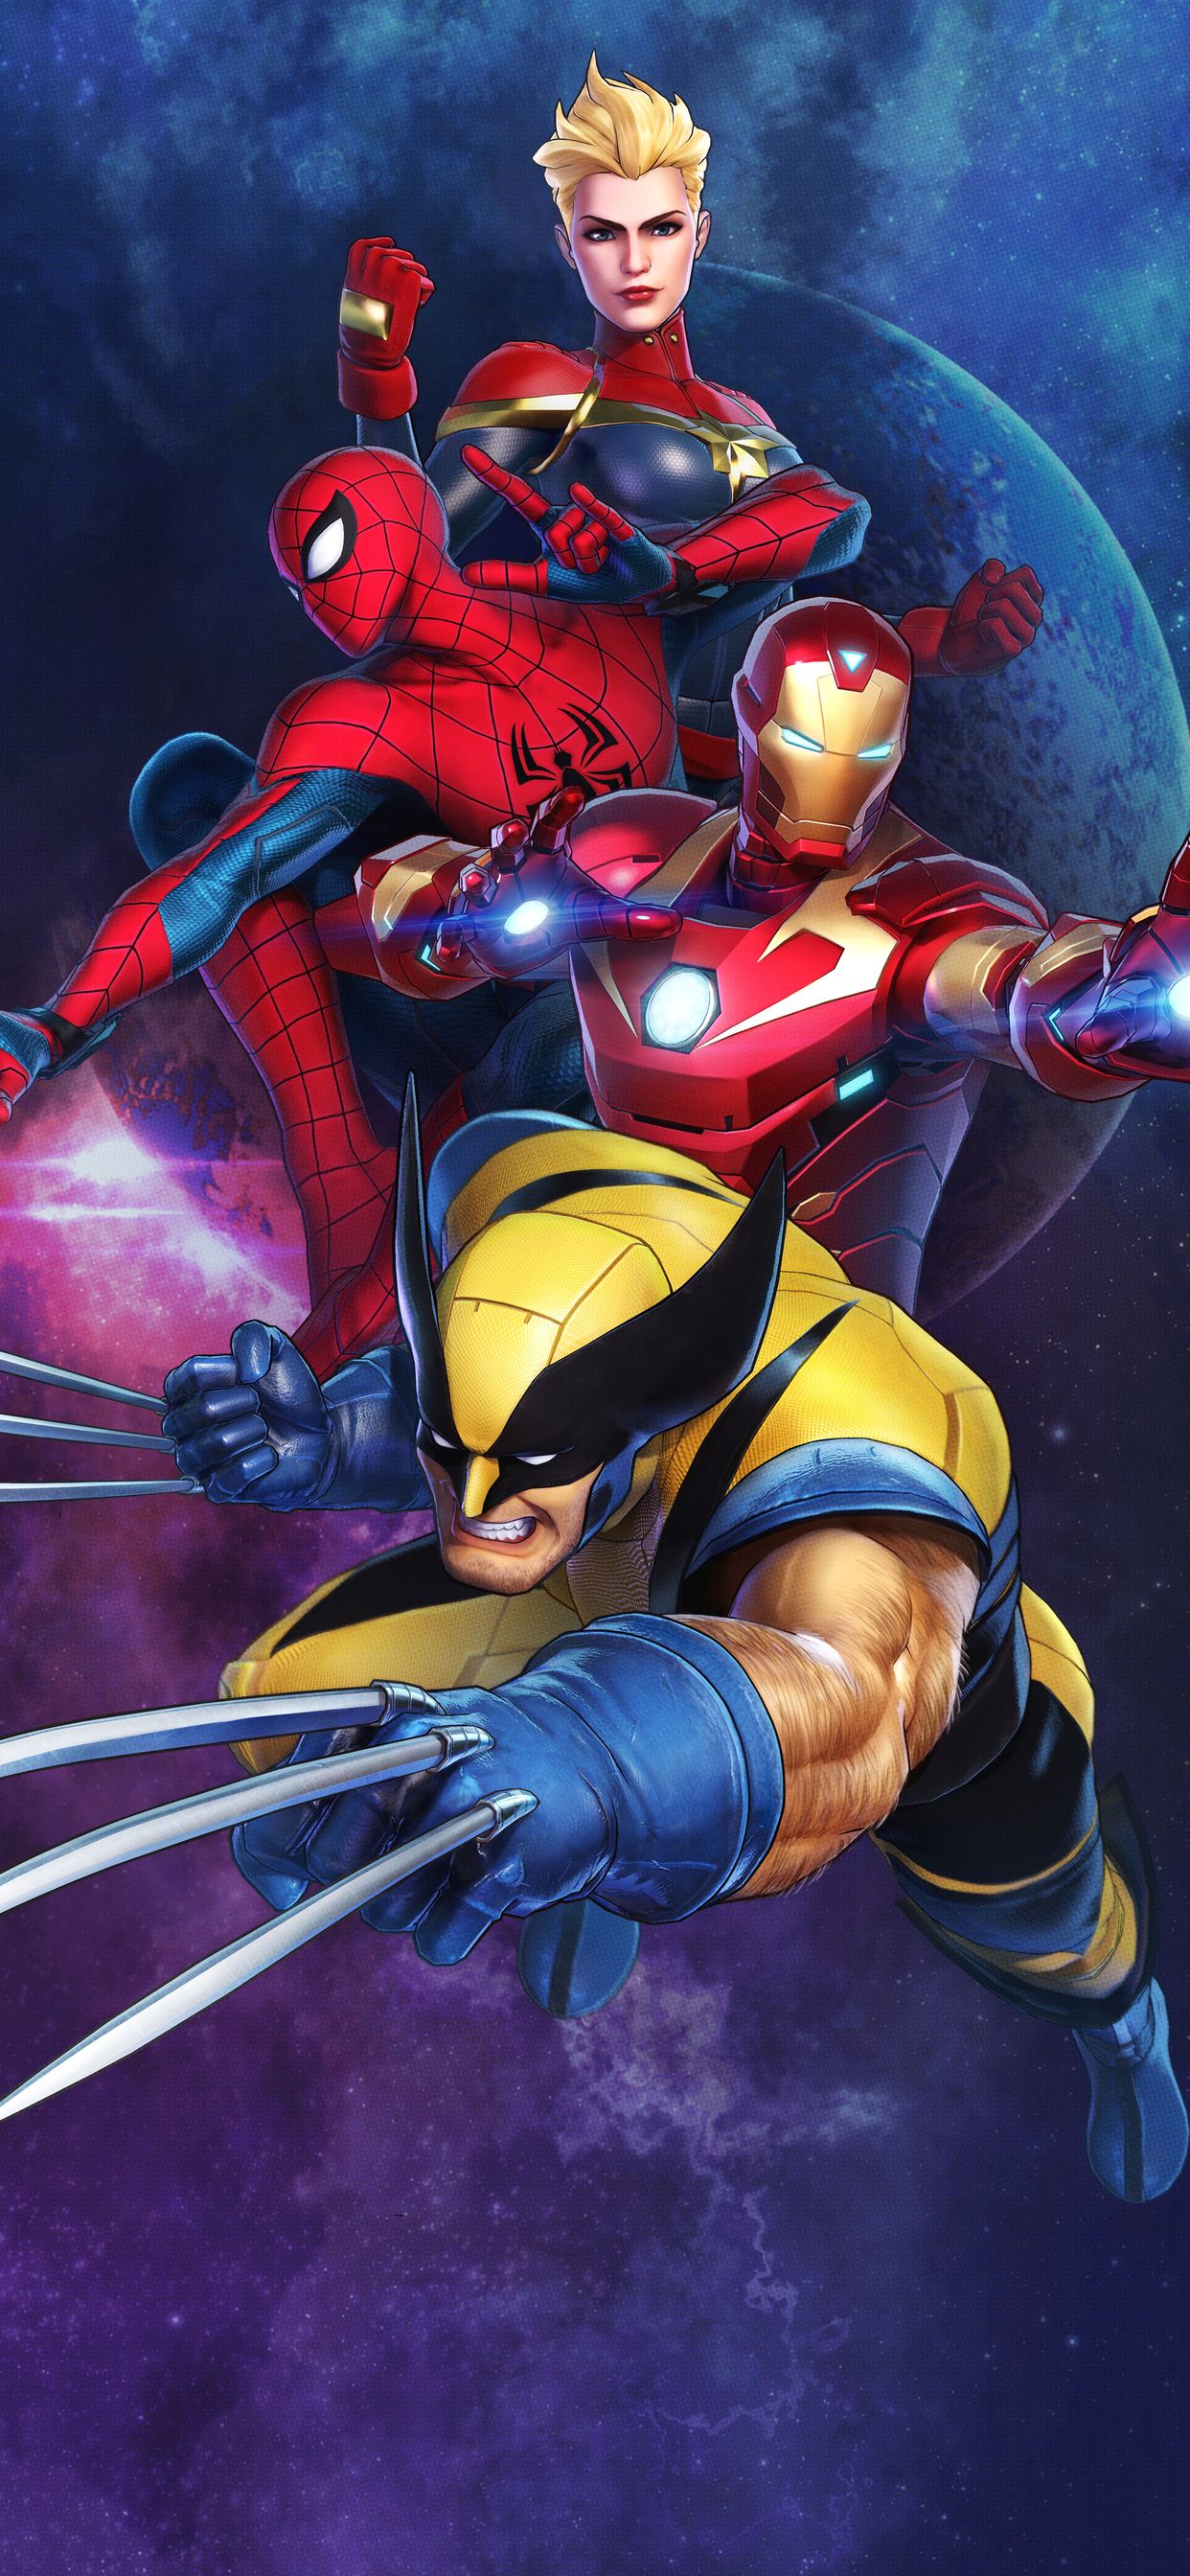 Wolverine Marvel Ultimate Alliance 3 The Black Order iPhone XS MAX HD 4k Wallpaper, Image, Background, Photo and Picture